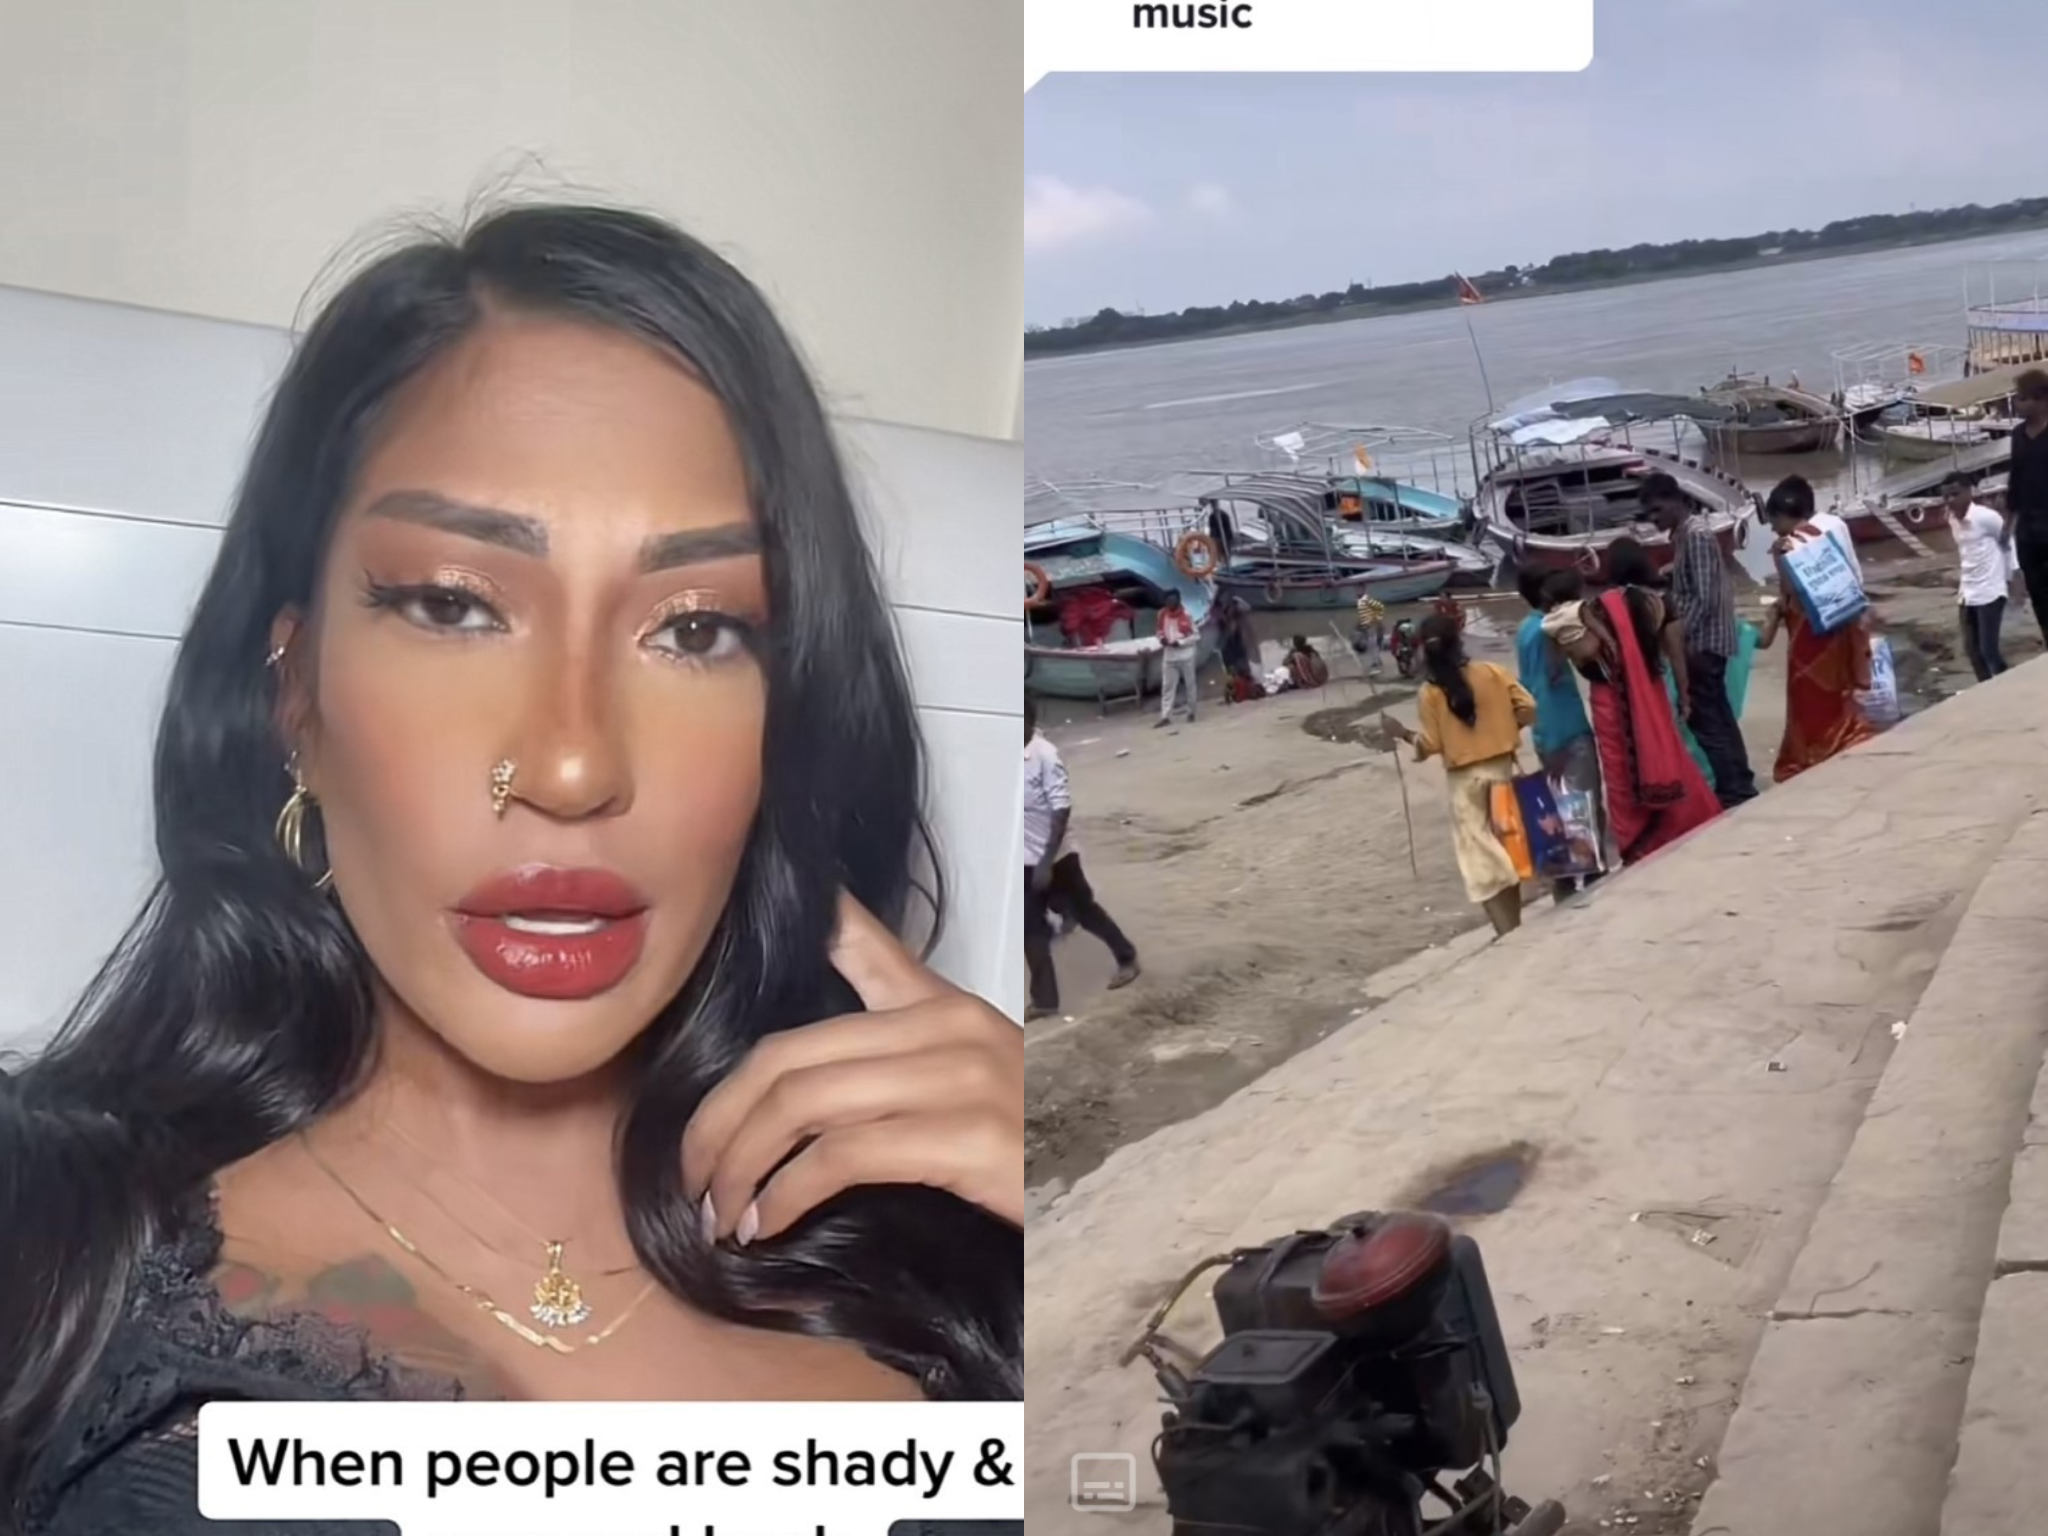 The influencer apologised for sounding “disrespectful”